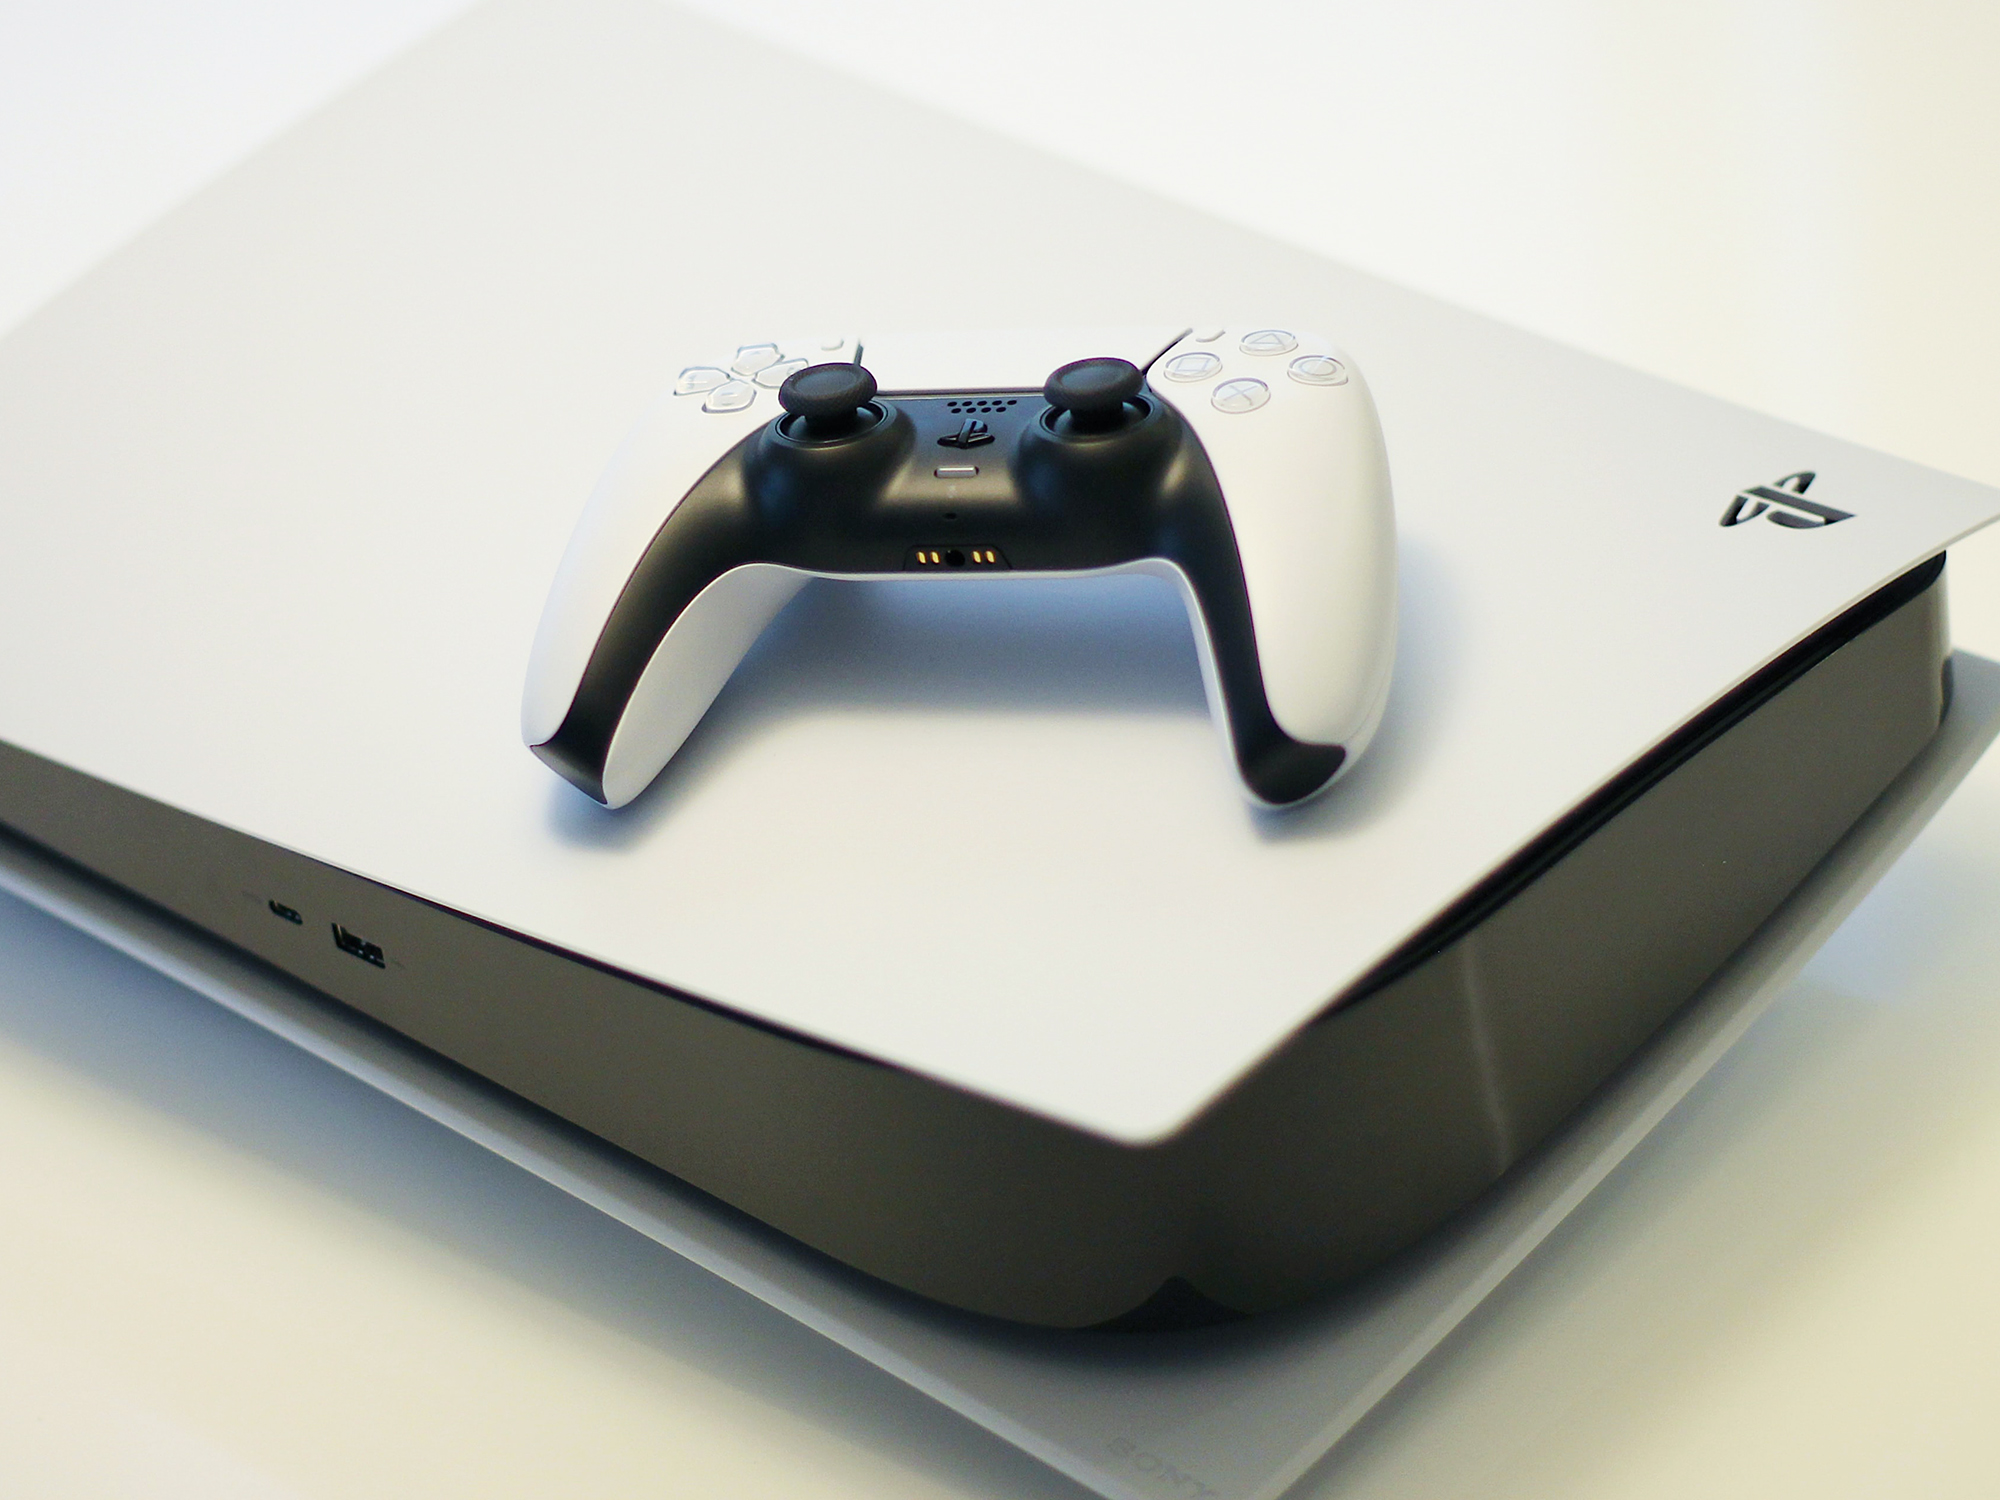 You can add more storage to your PS5 in under 10 minutes. Here's how